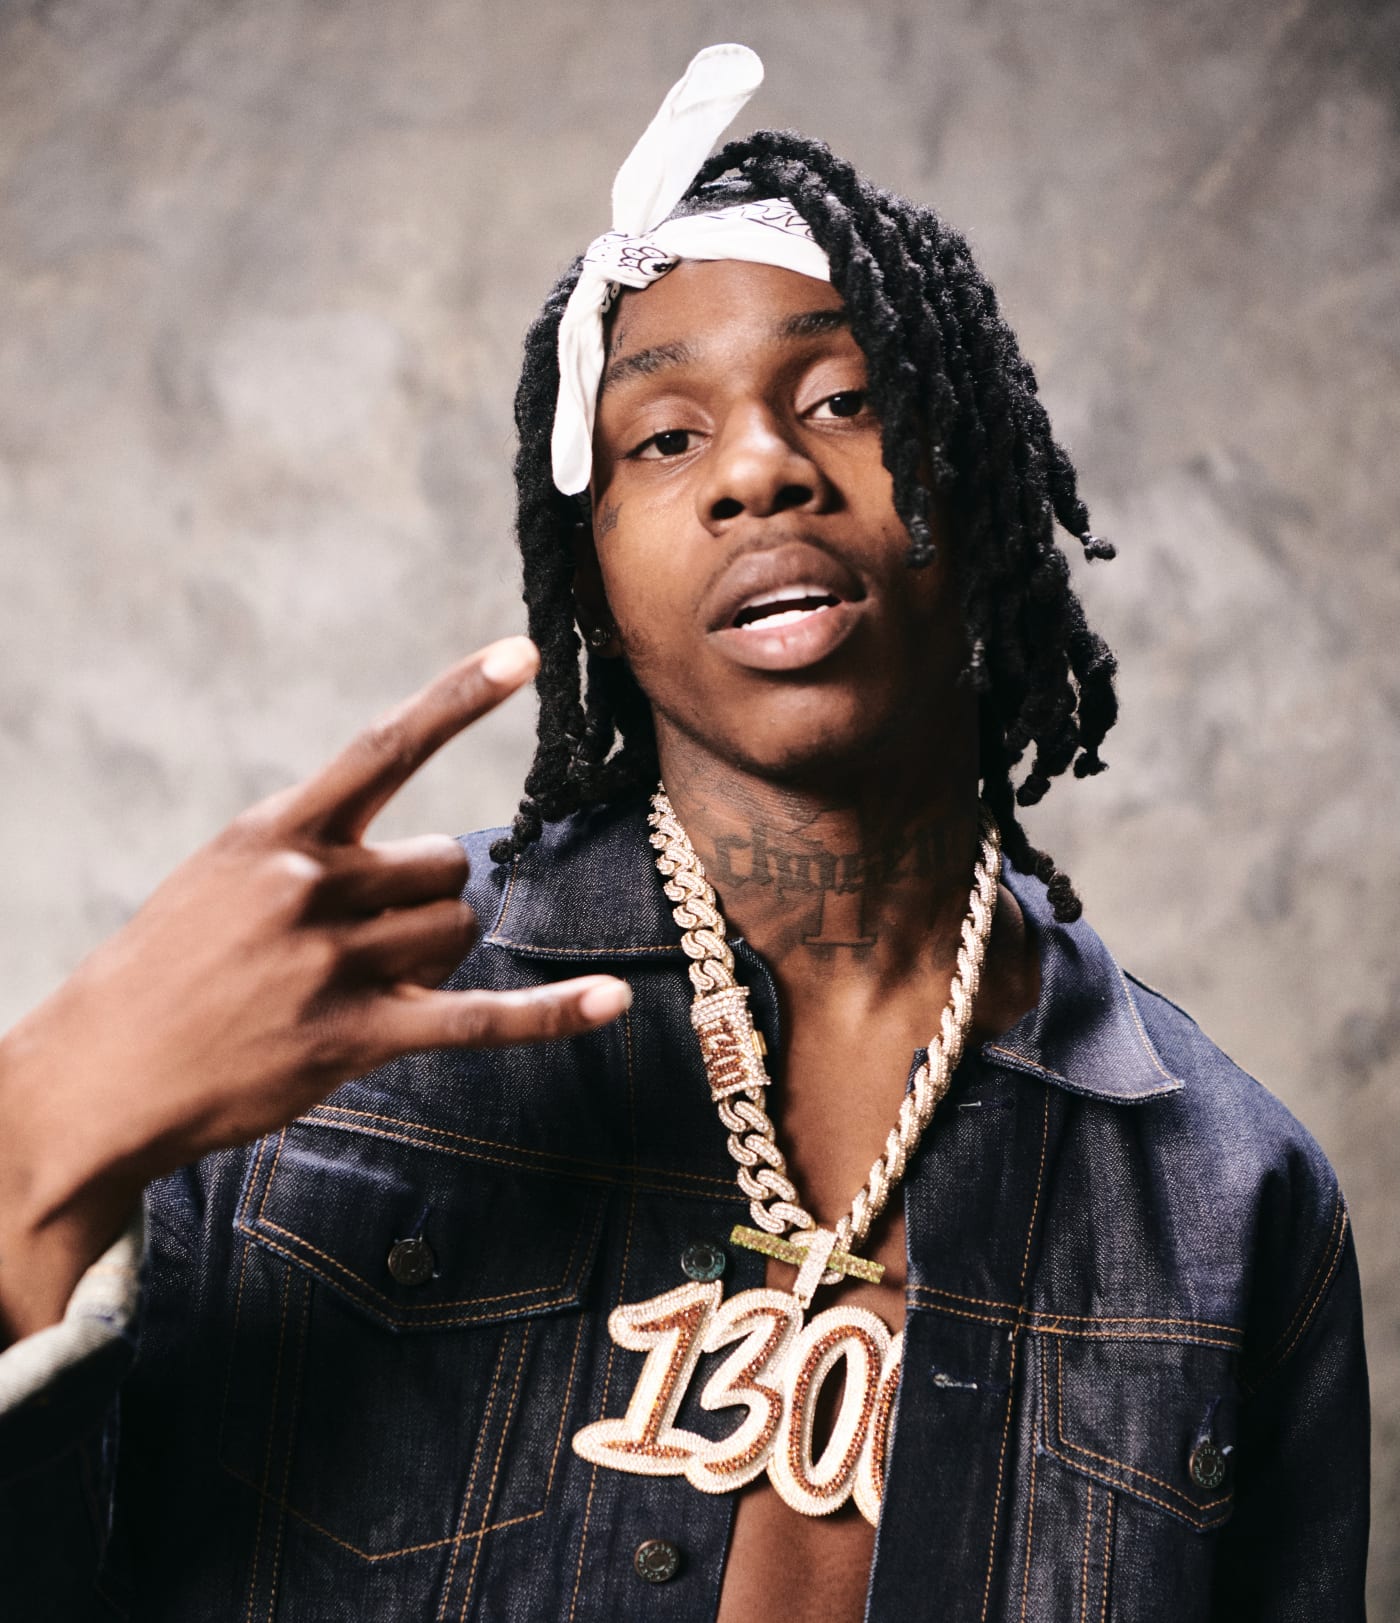 Polo G Reveals He Almost Overdosed 31